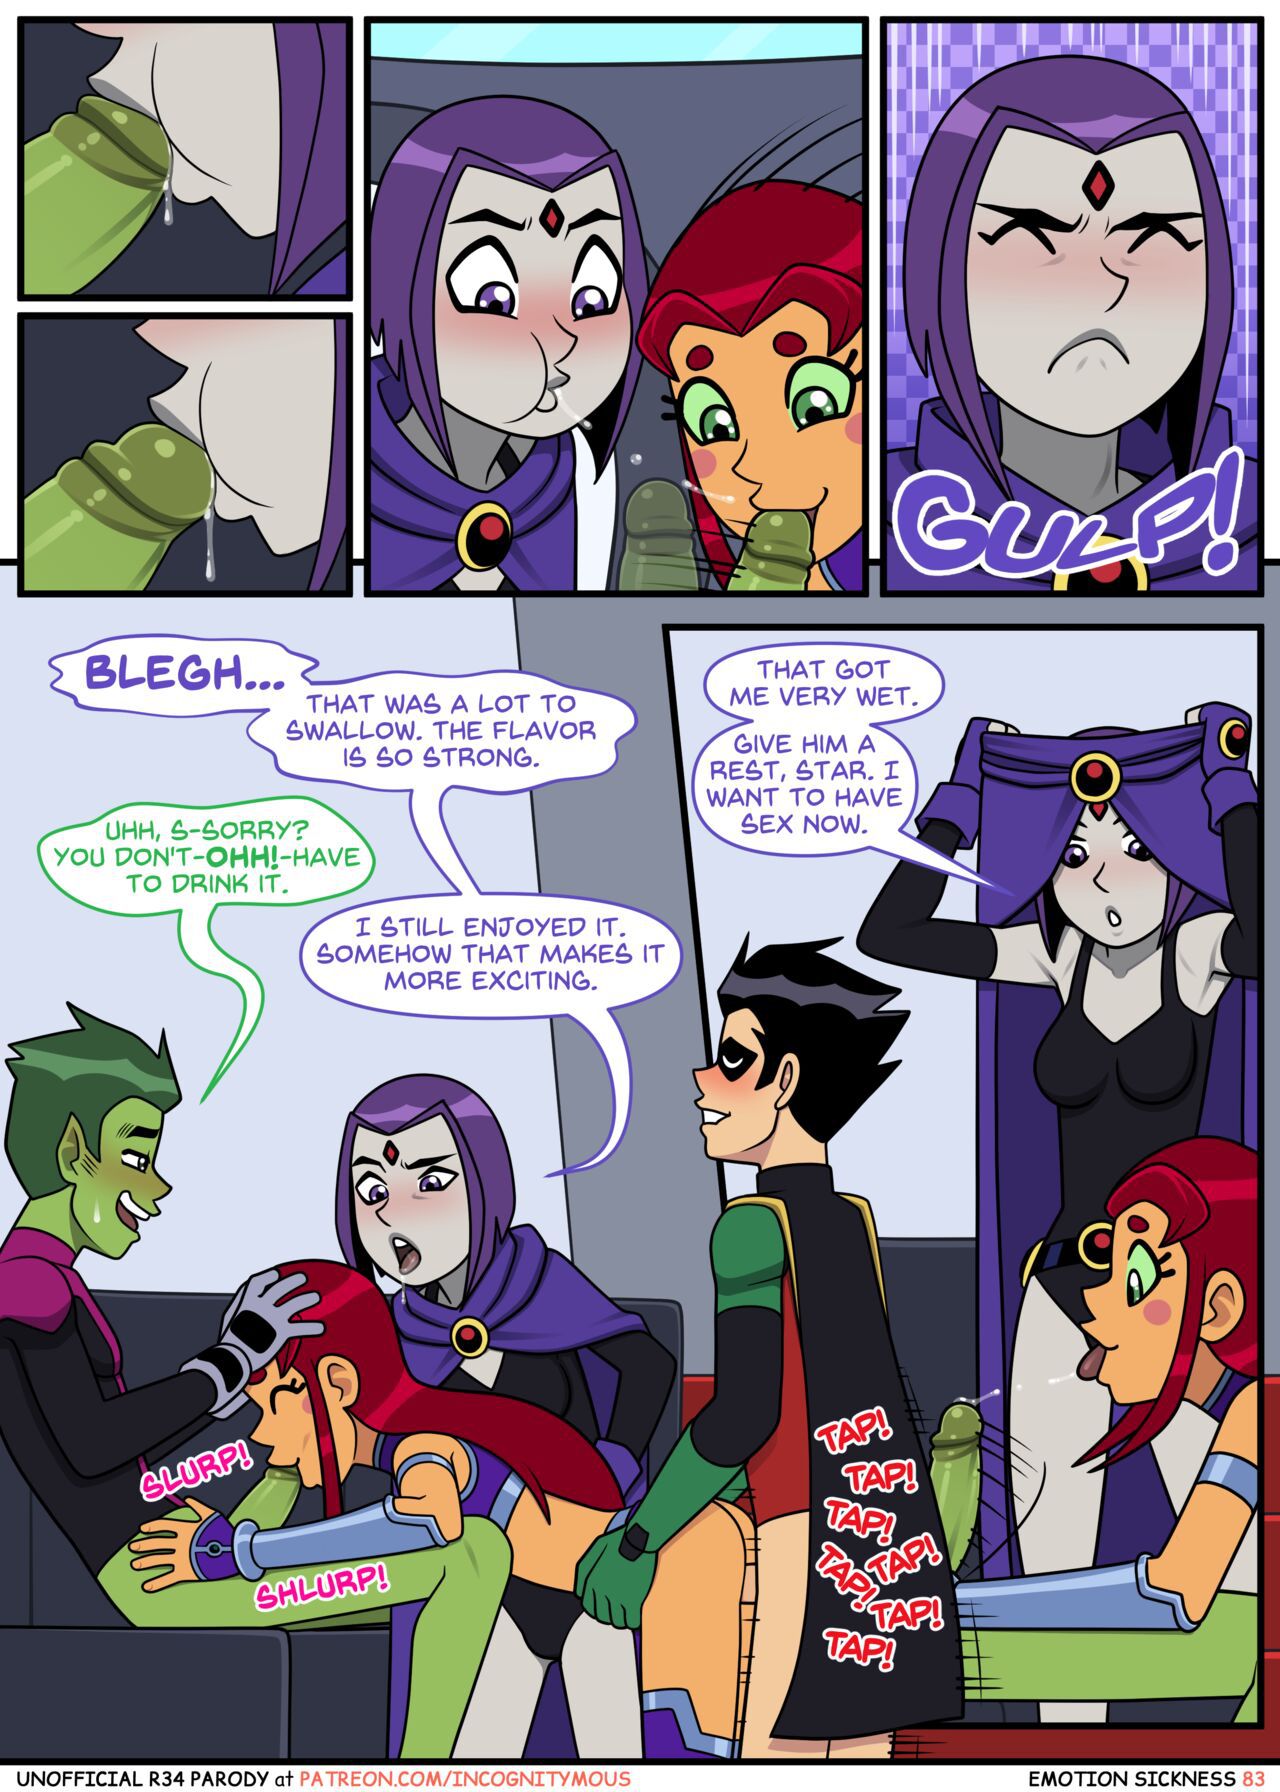 [Incognitymous] Emotion Sickness (Teen Titans) [Ongoing] 80